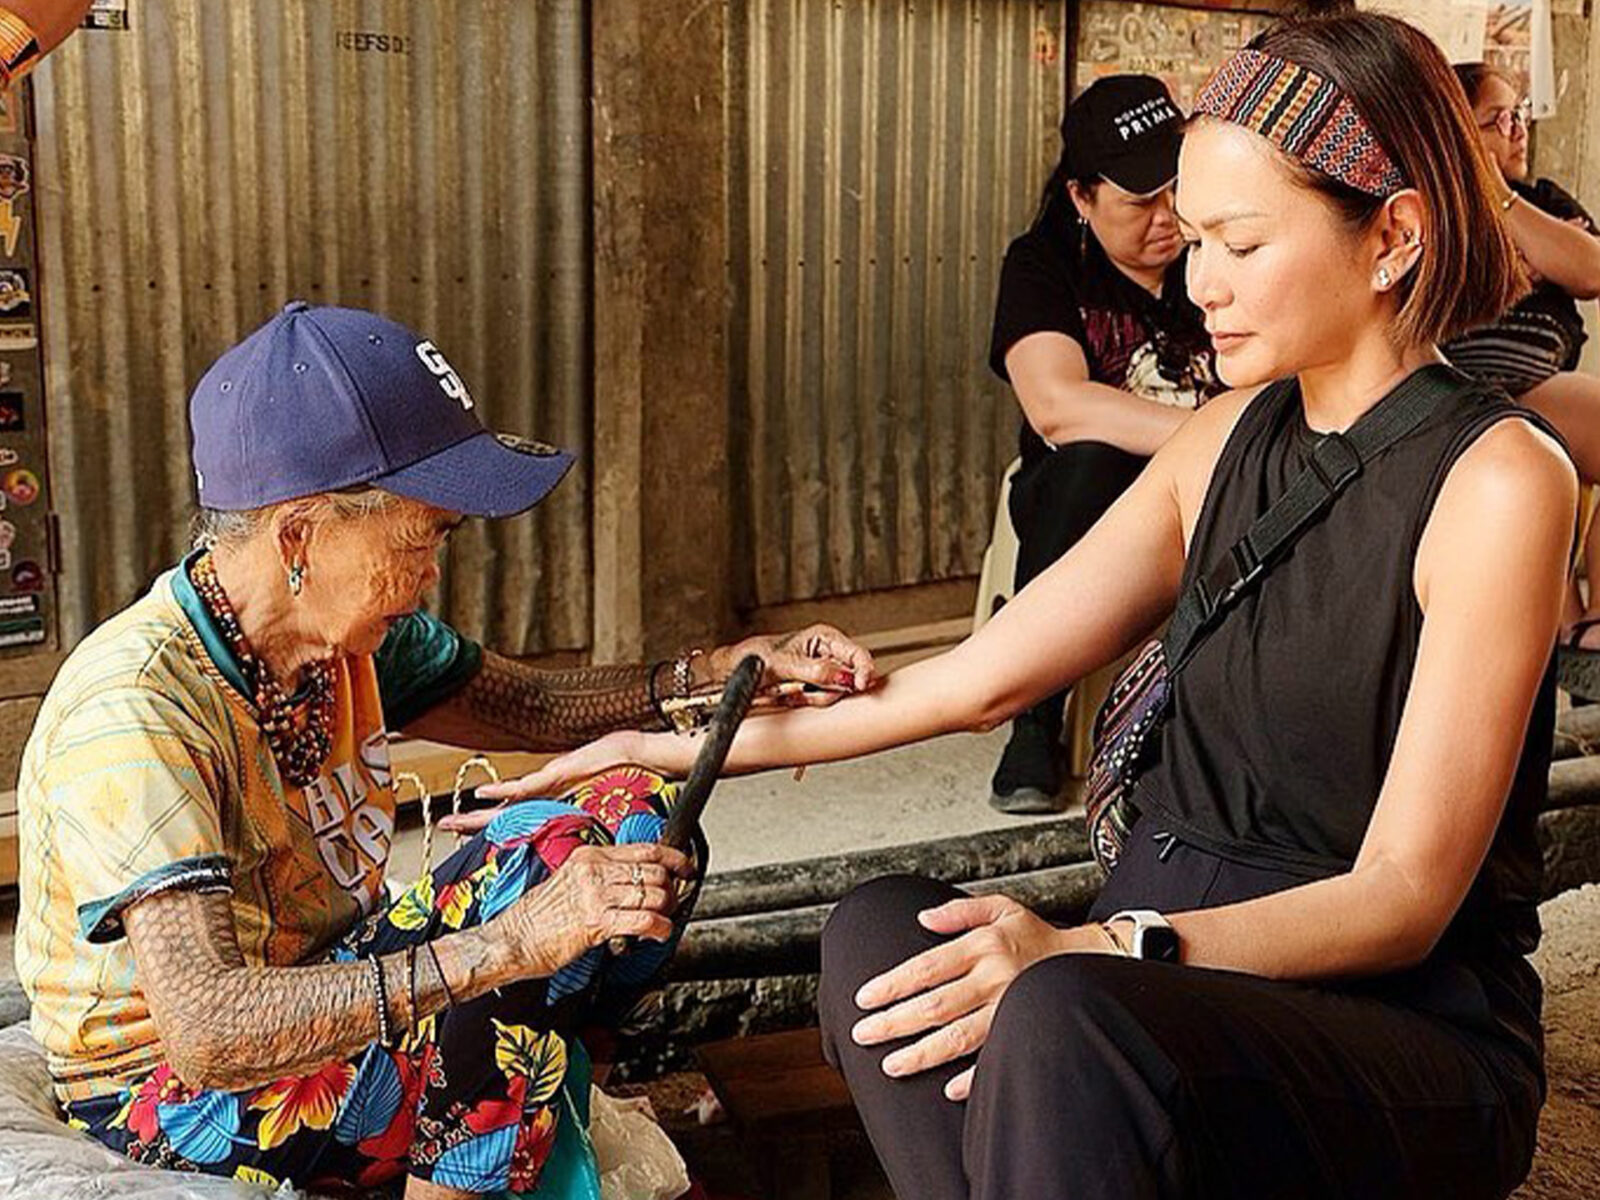 Apples Aberin getting a tattoo on her wrist from Apo Whang-Od